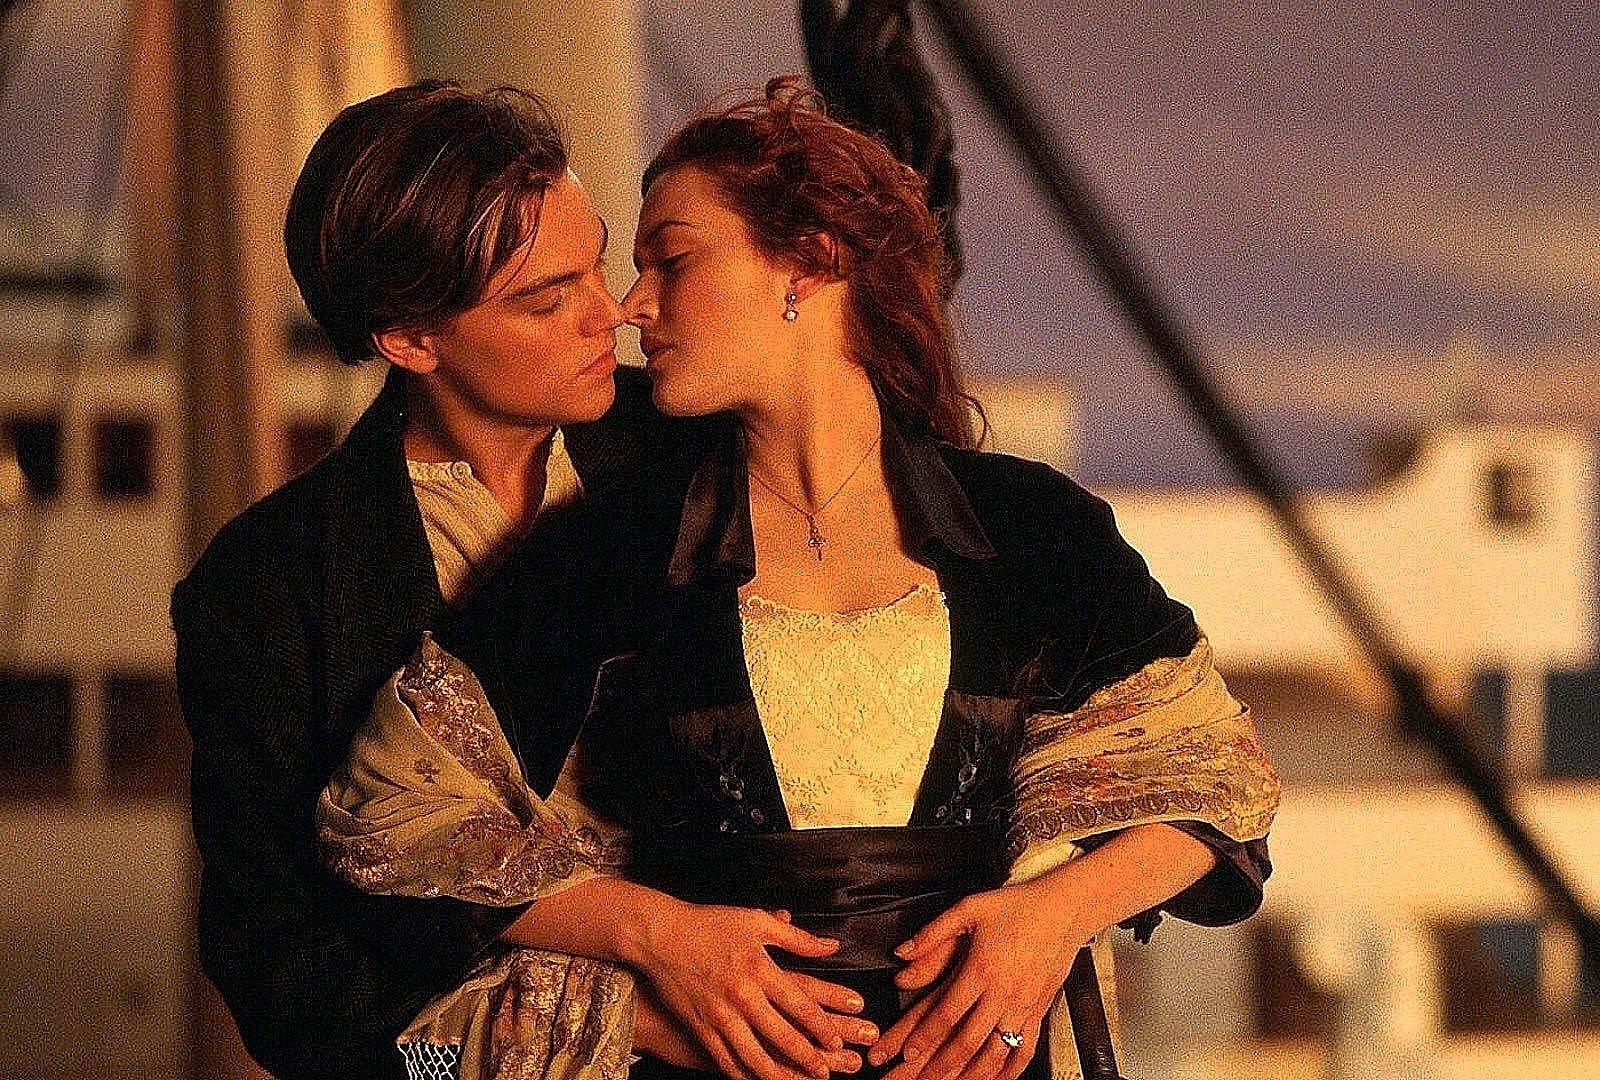 Titanic' Returning to Theaters in 3D For Its 25th Anniversary